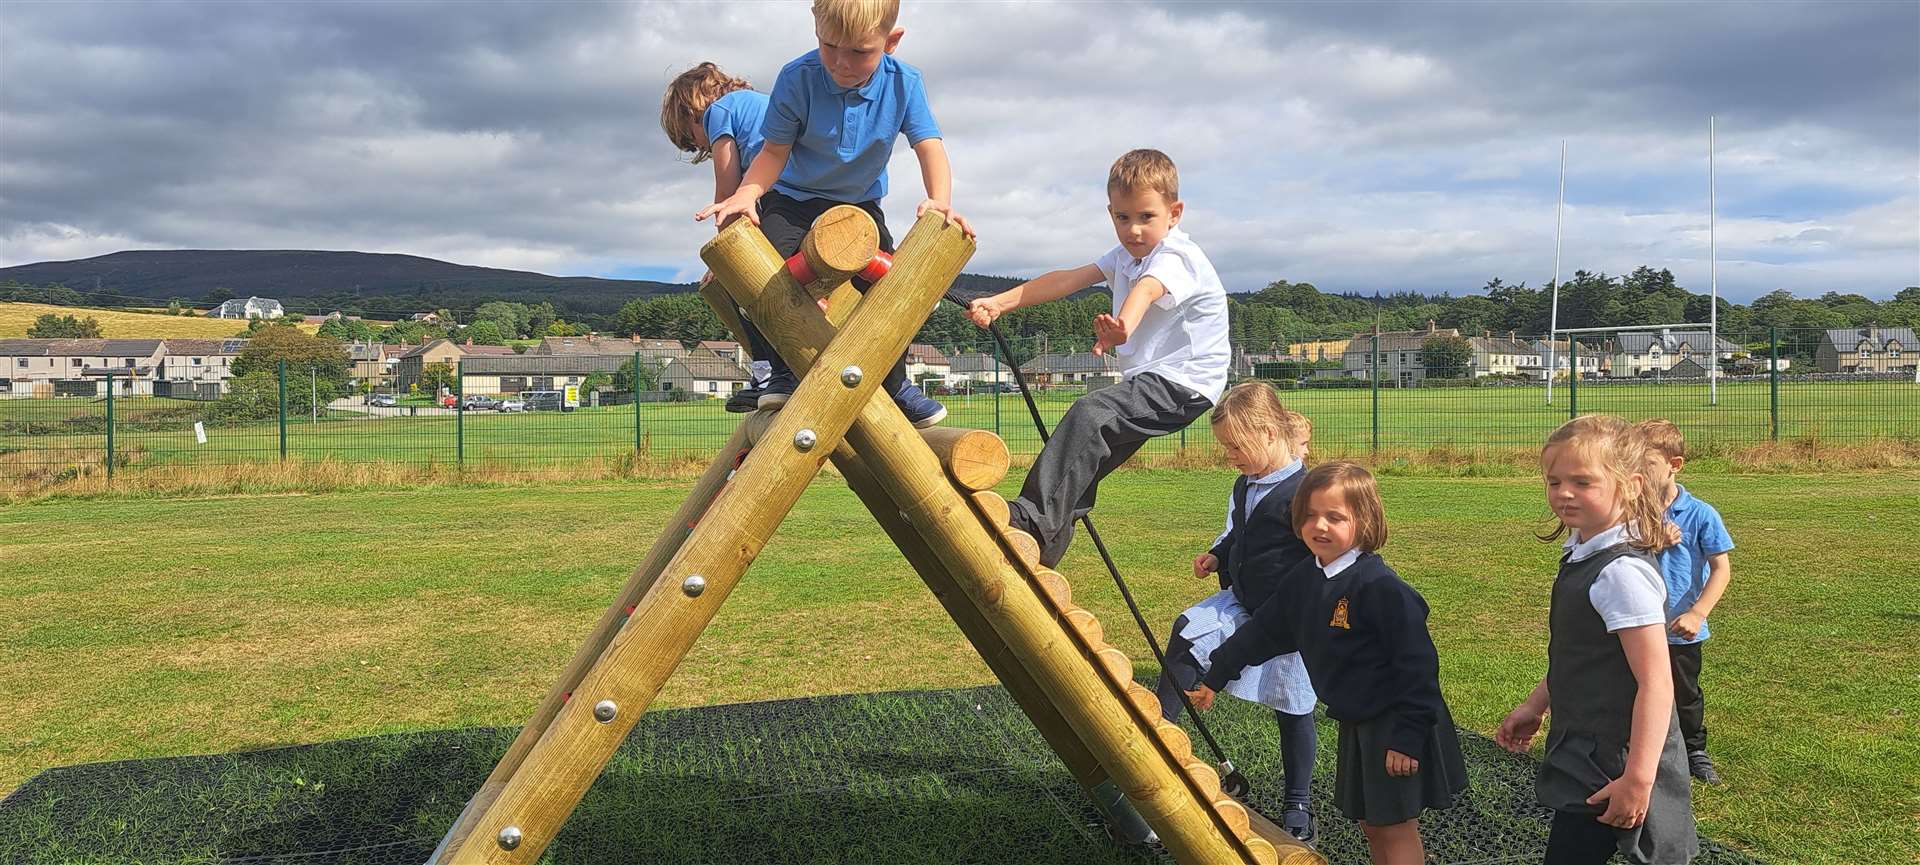 Pupils are thrilled with the new play equipment.